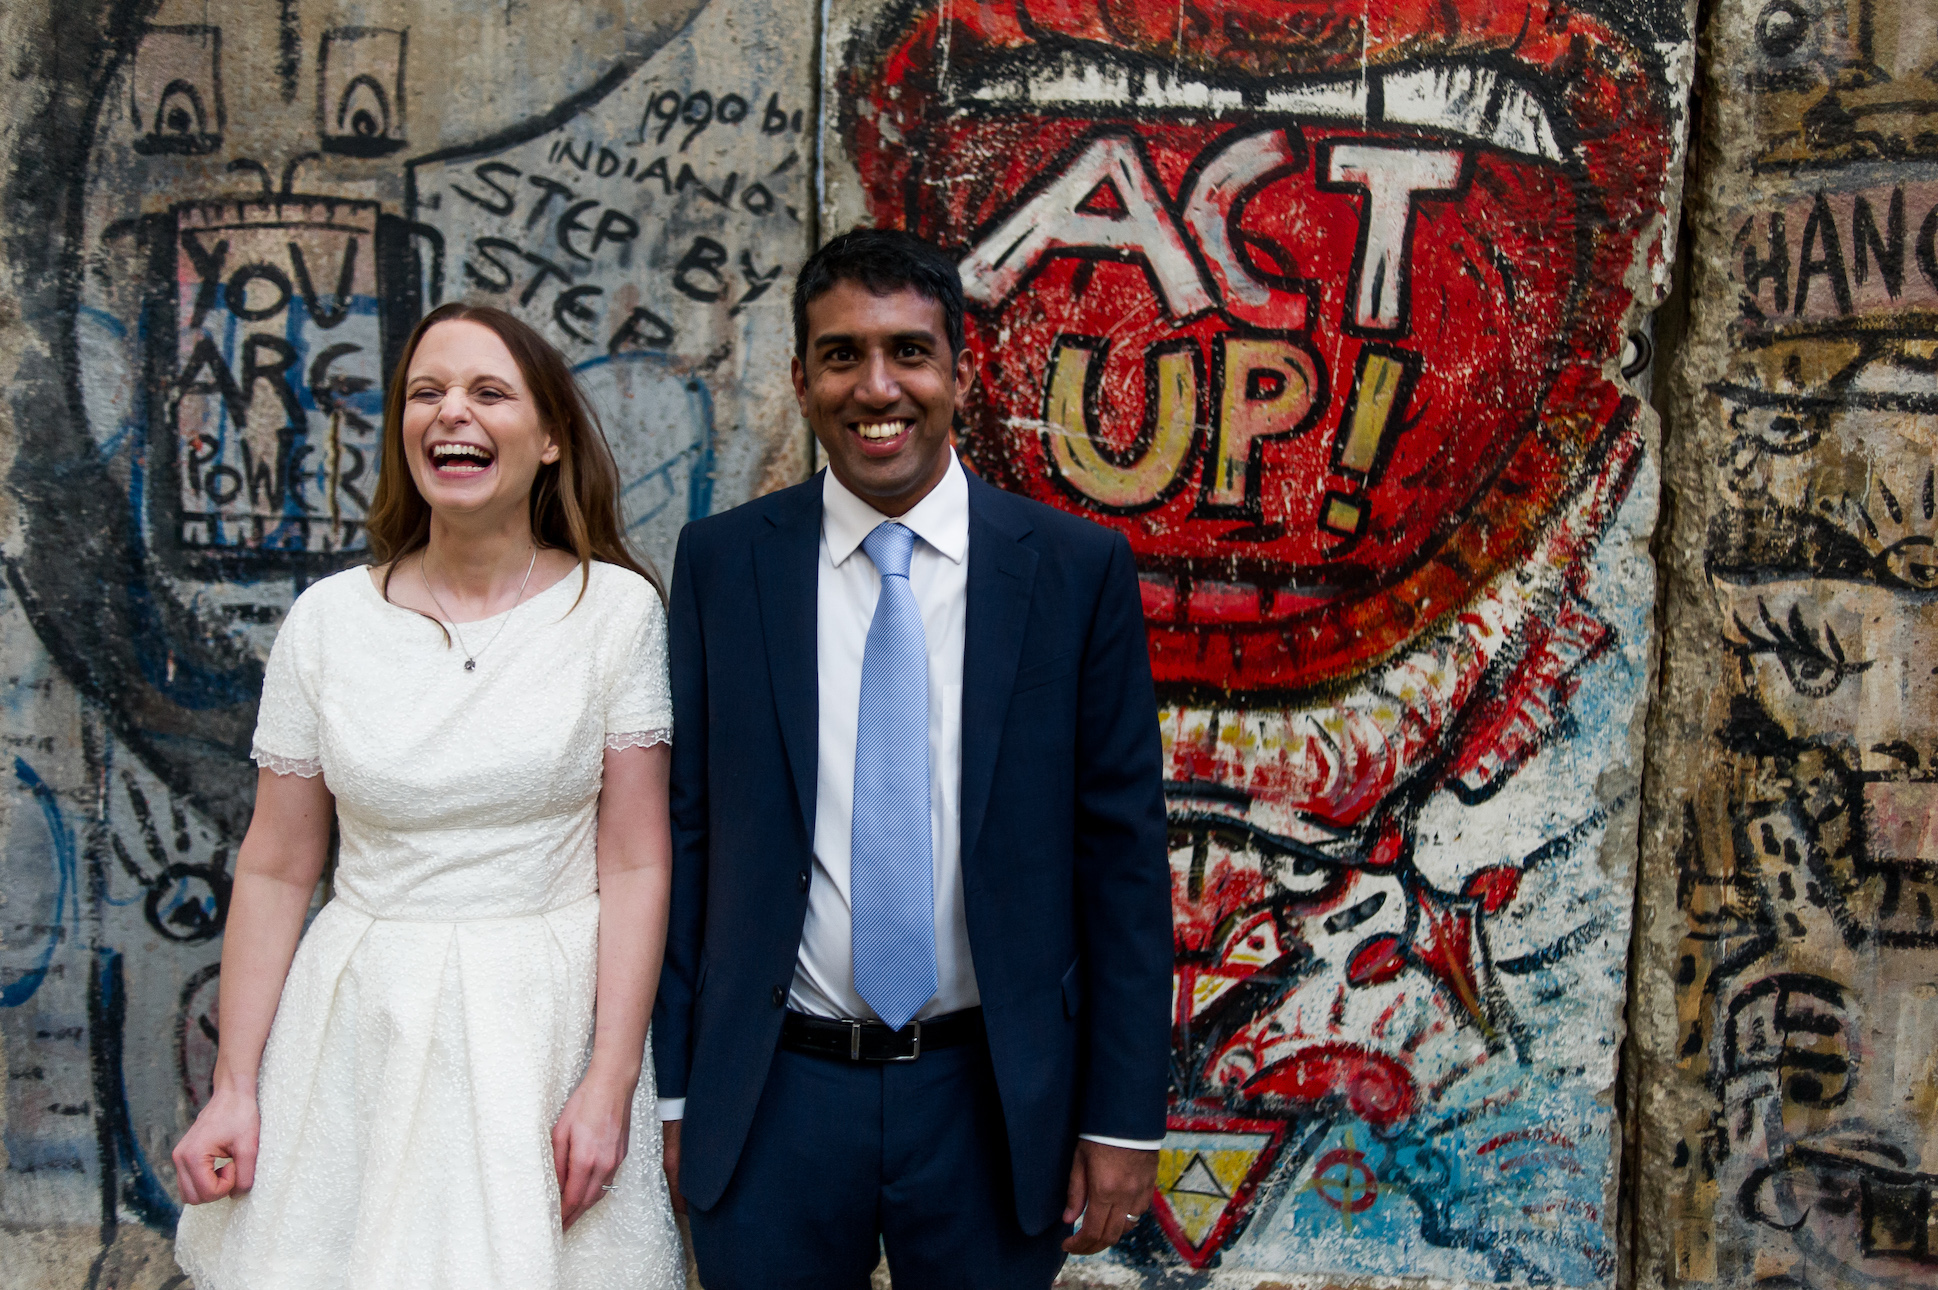 A wedding couple hold hands and smile while standing in front of a graffiti wall.